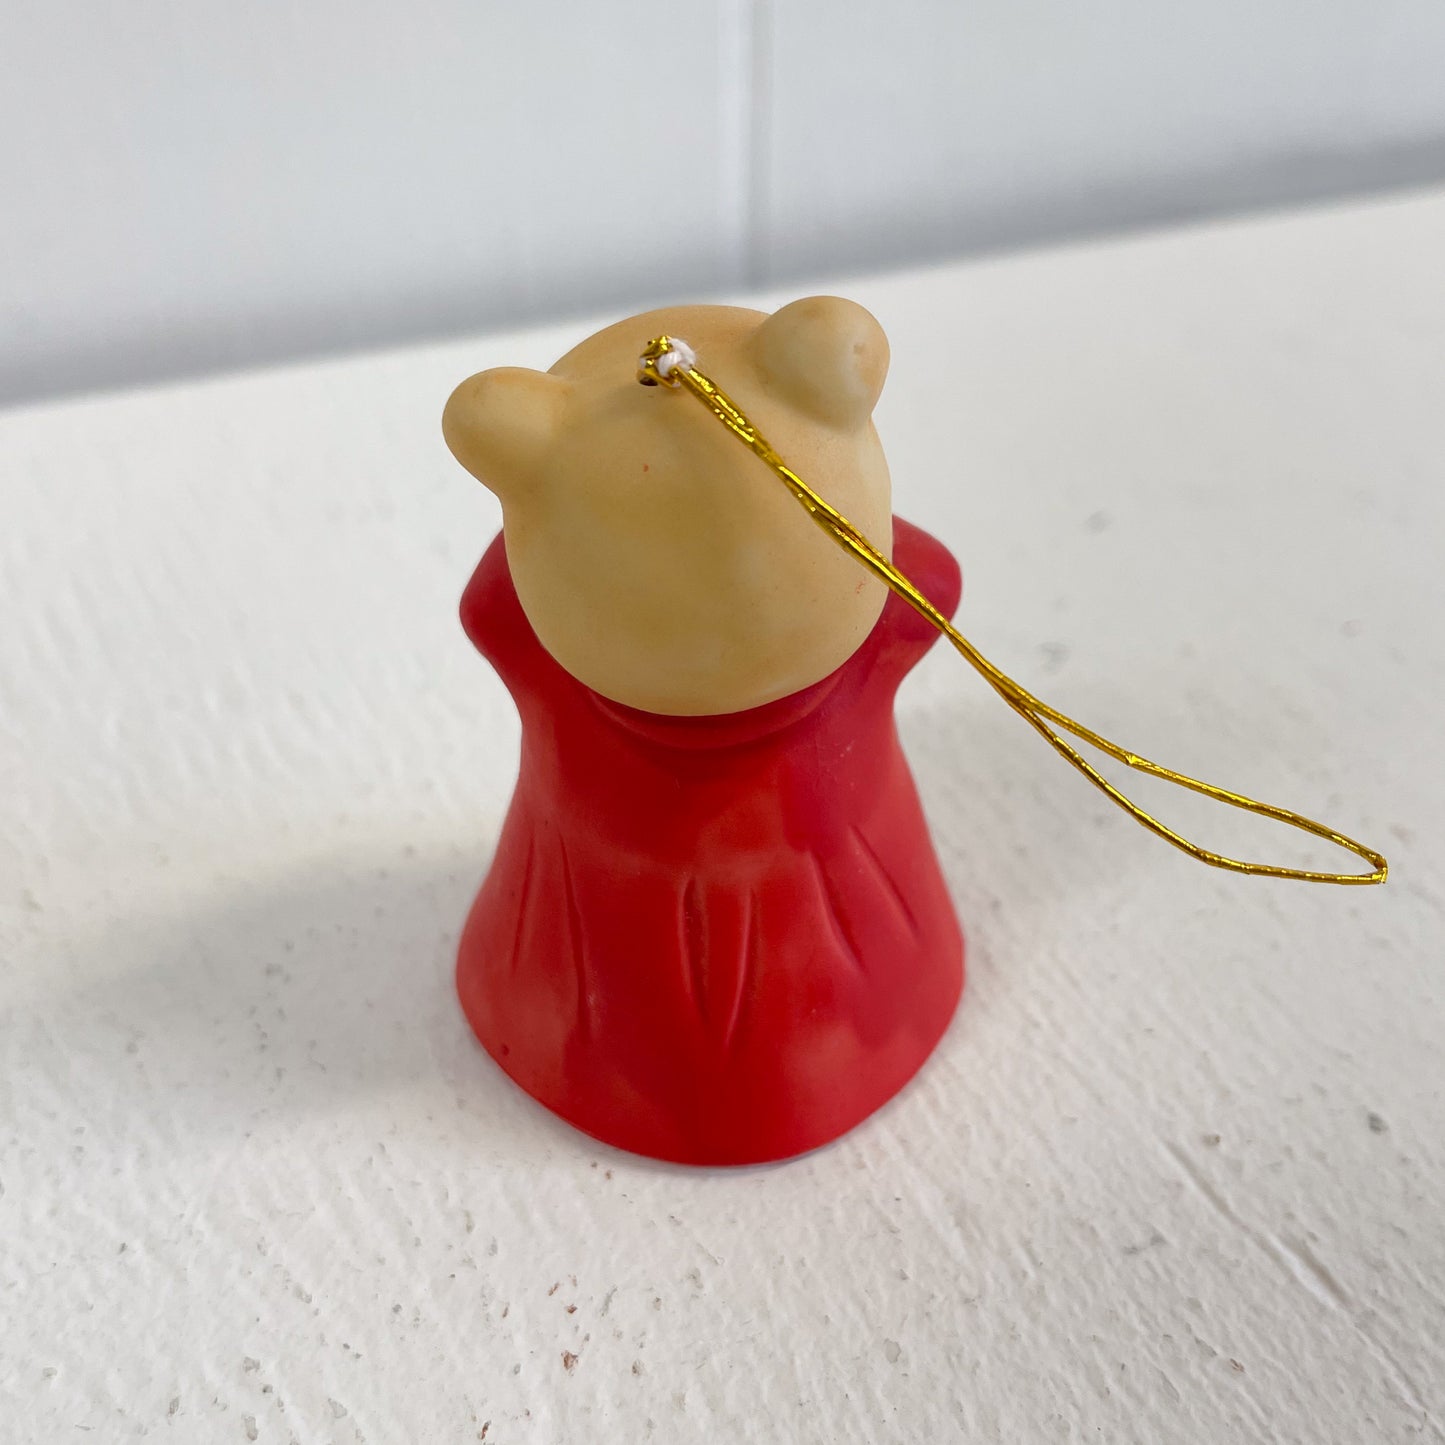 Sleepy Bear Bell Ornament by Giftco